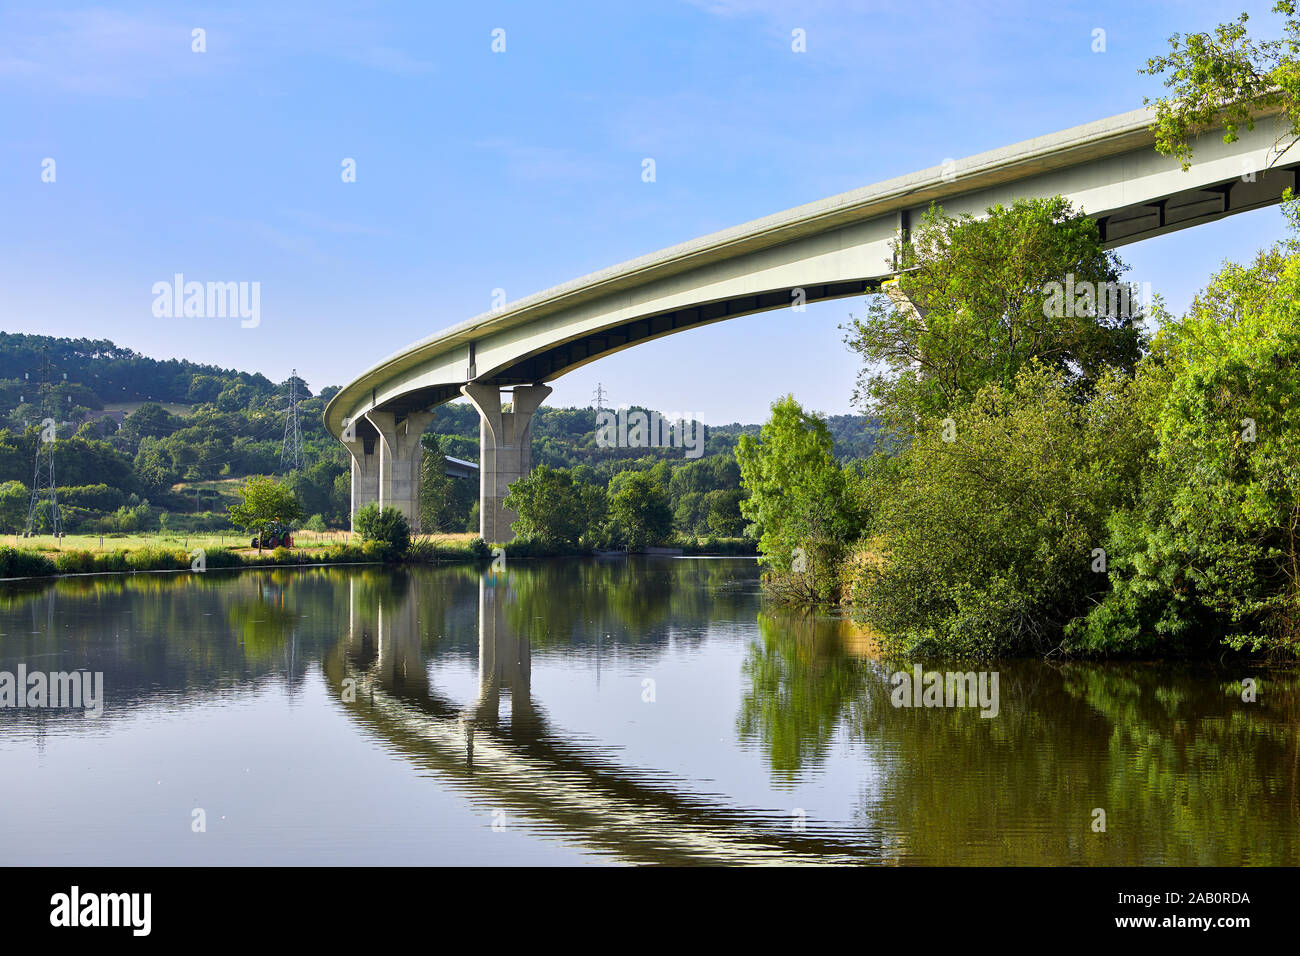 Image of the river vilaine and the D164 bridge on the Northern approach to Redon, Brittany, France Stock Photo